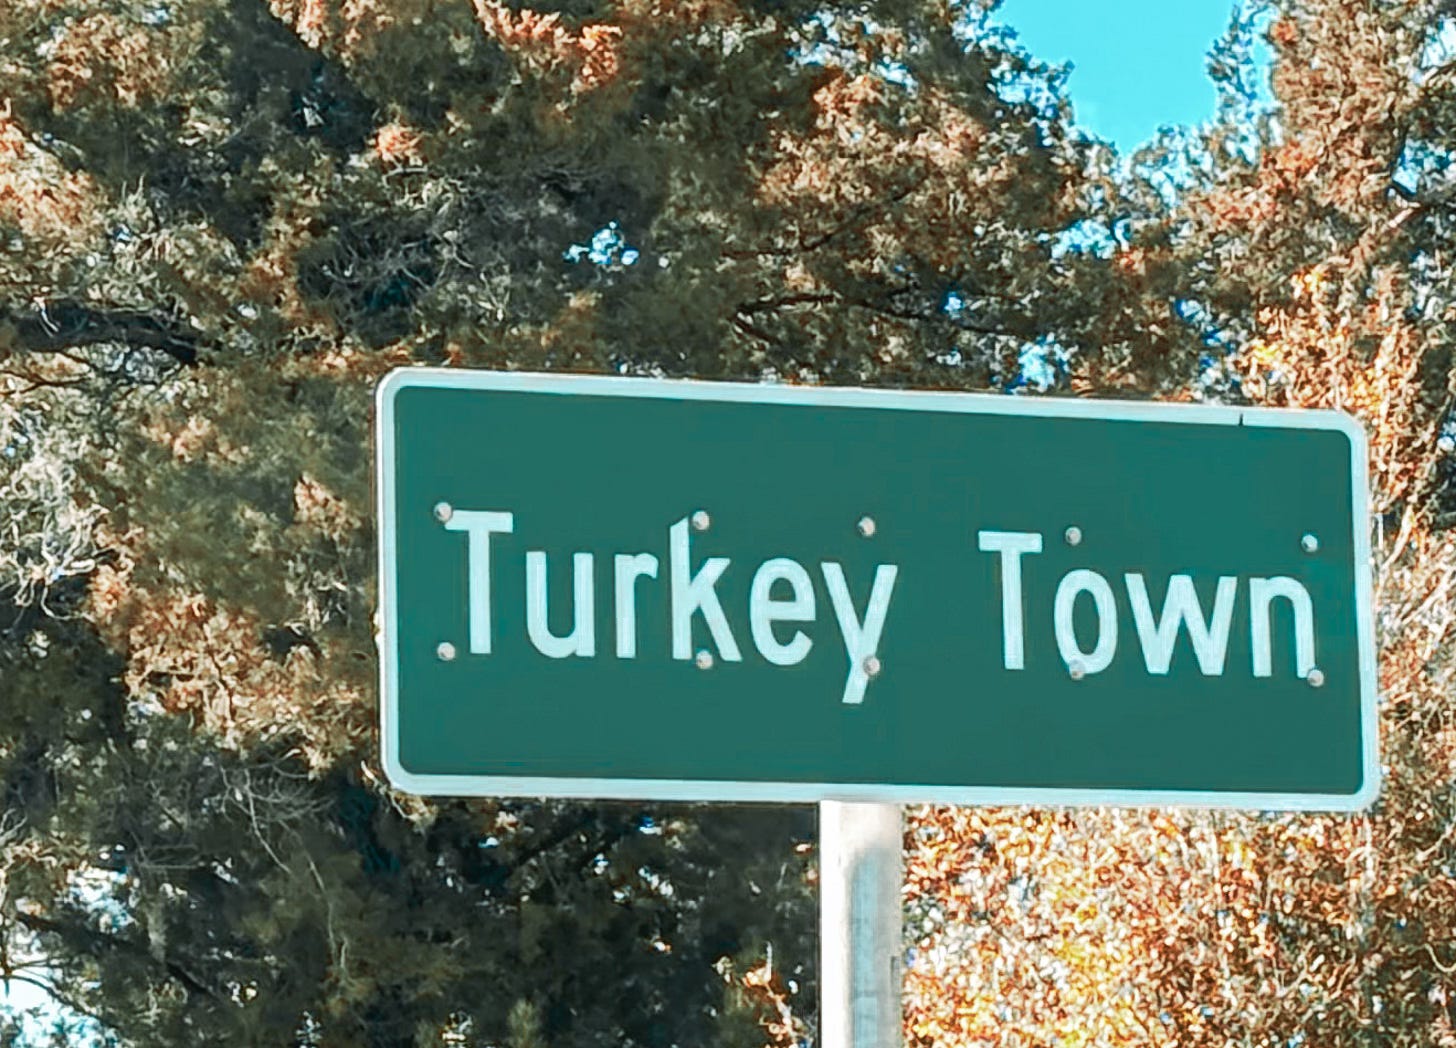 Road sign with the words Turkey Town with trees in background